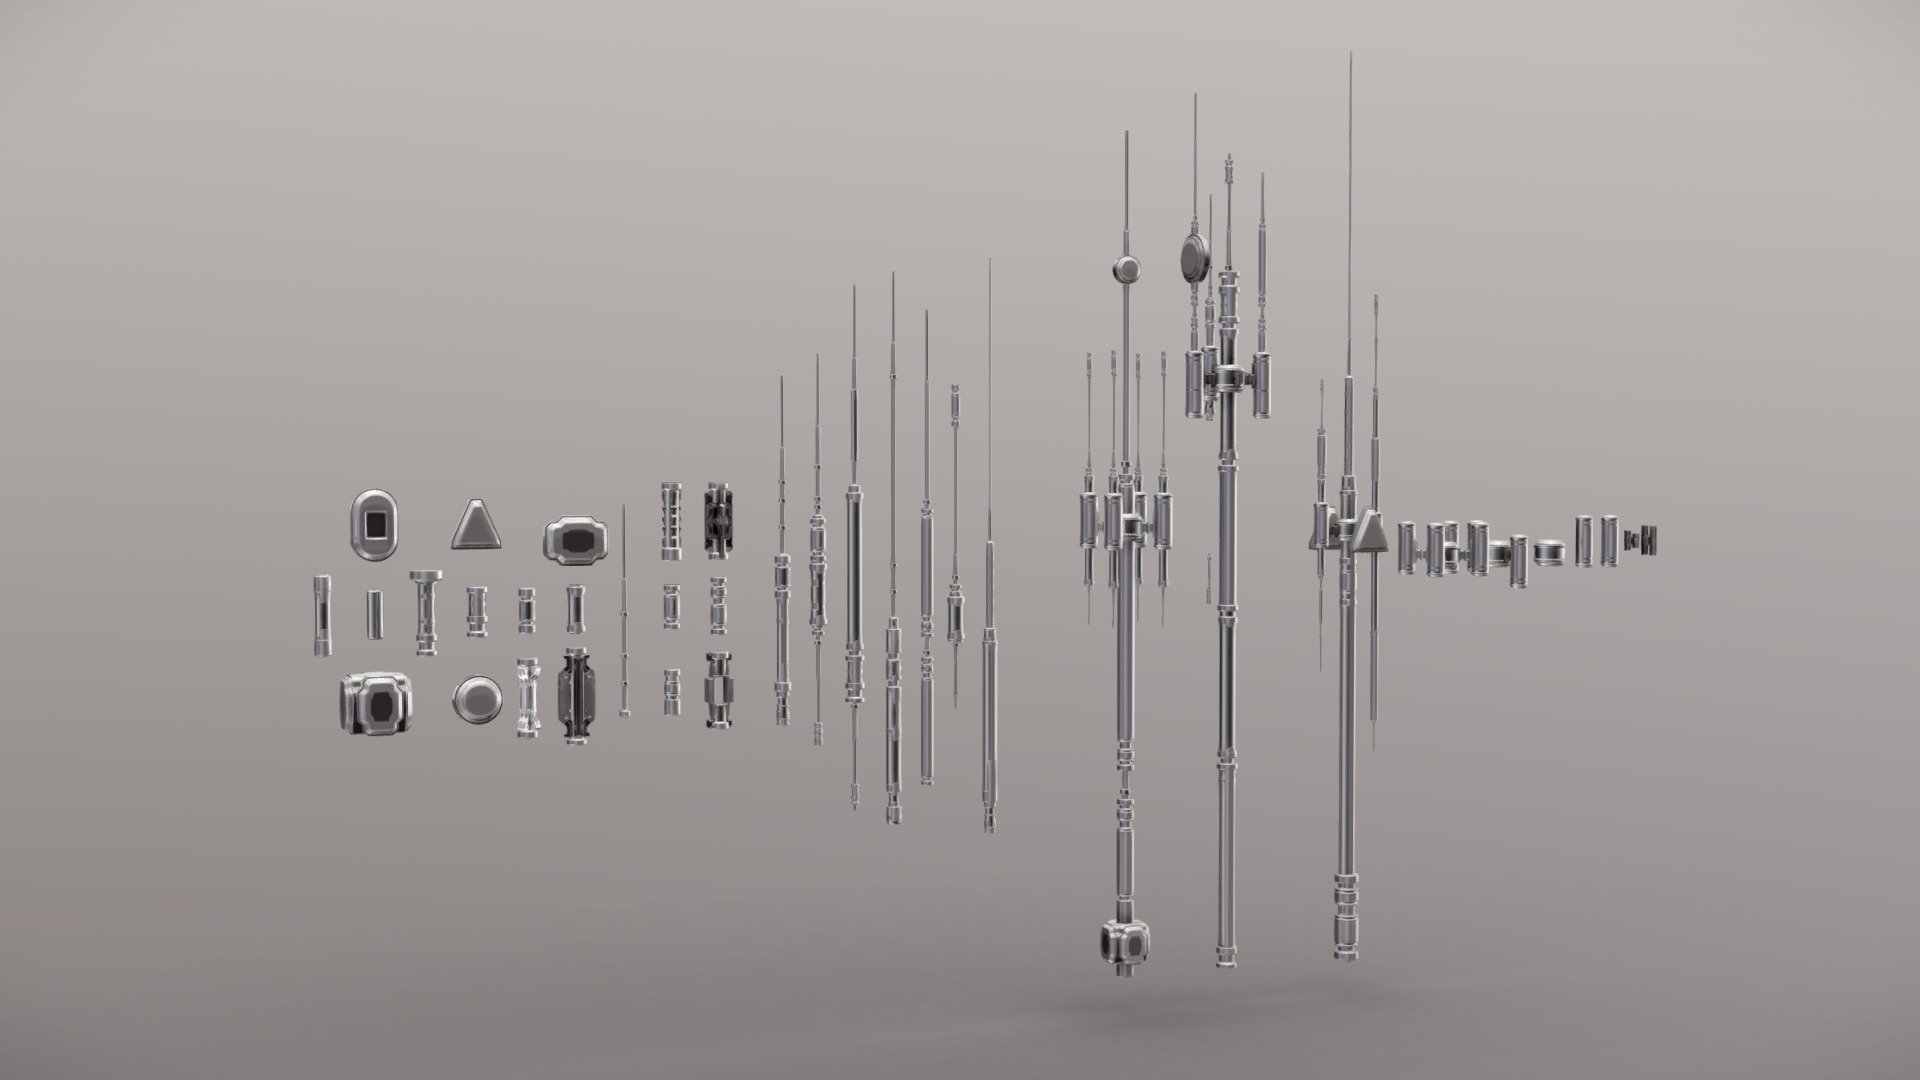 Collection of SciFi style antennas, modular and adapted for kitbashing, these models were modeled in detail one by one, using as tools the &ldquo;Sci-Fi Greebles Collection I